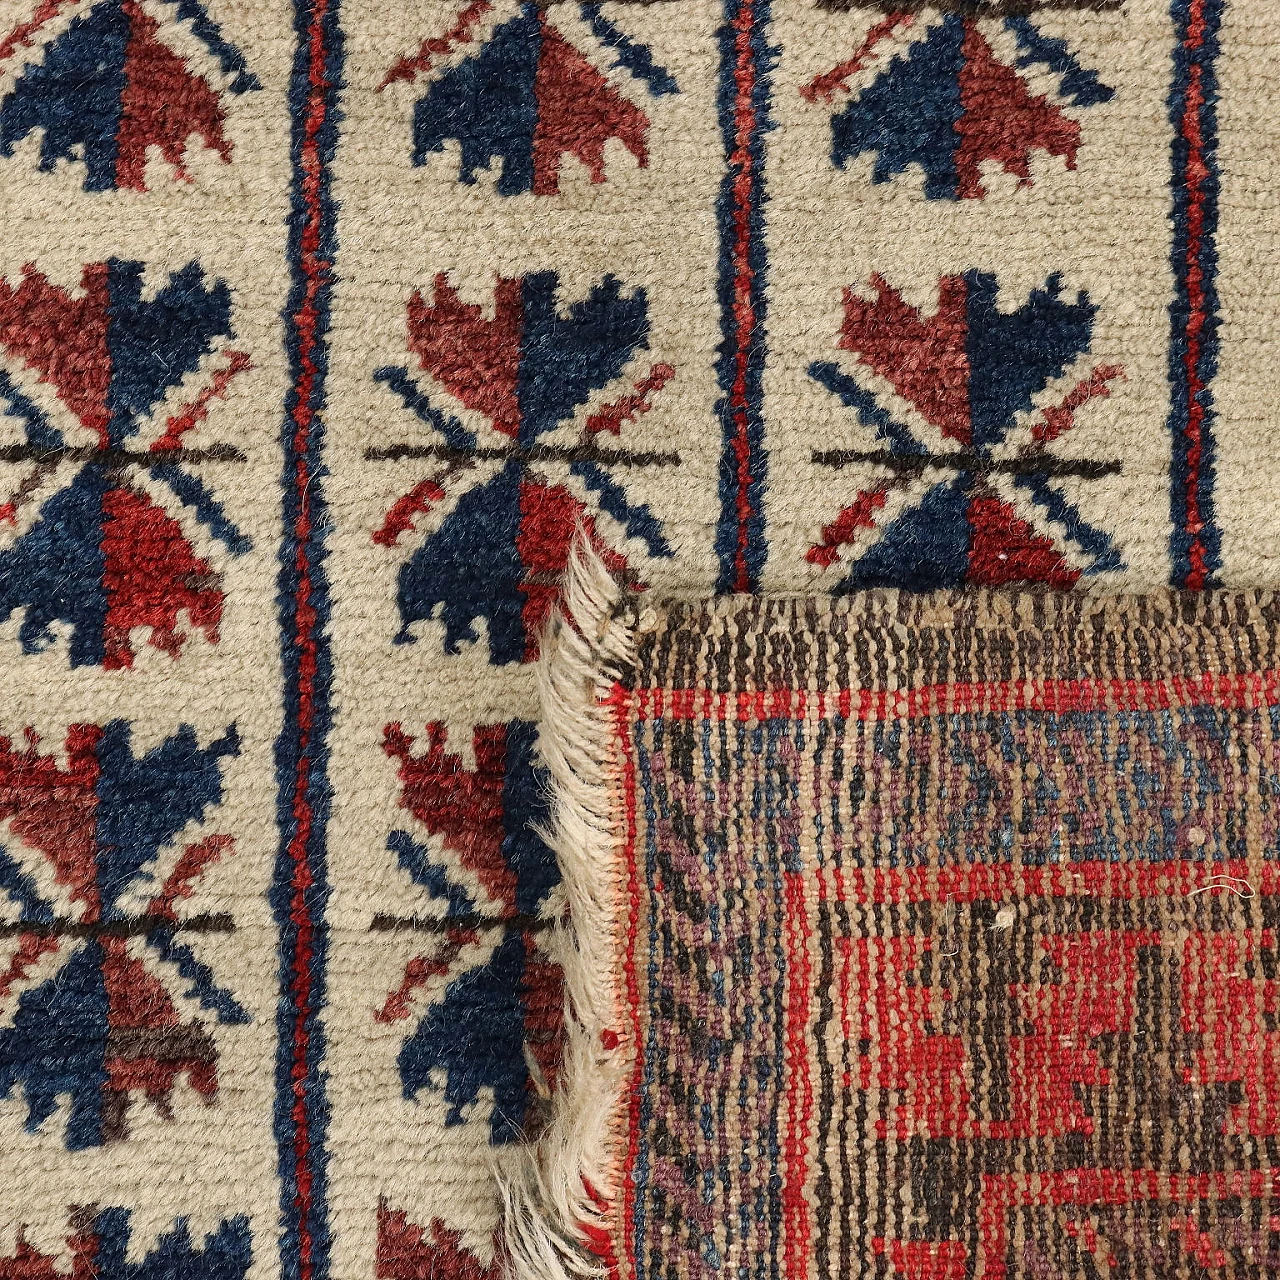 Iranian red, blue and beige wool Beluchi rug 8